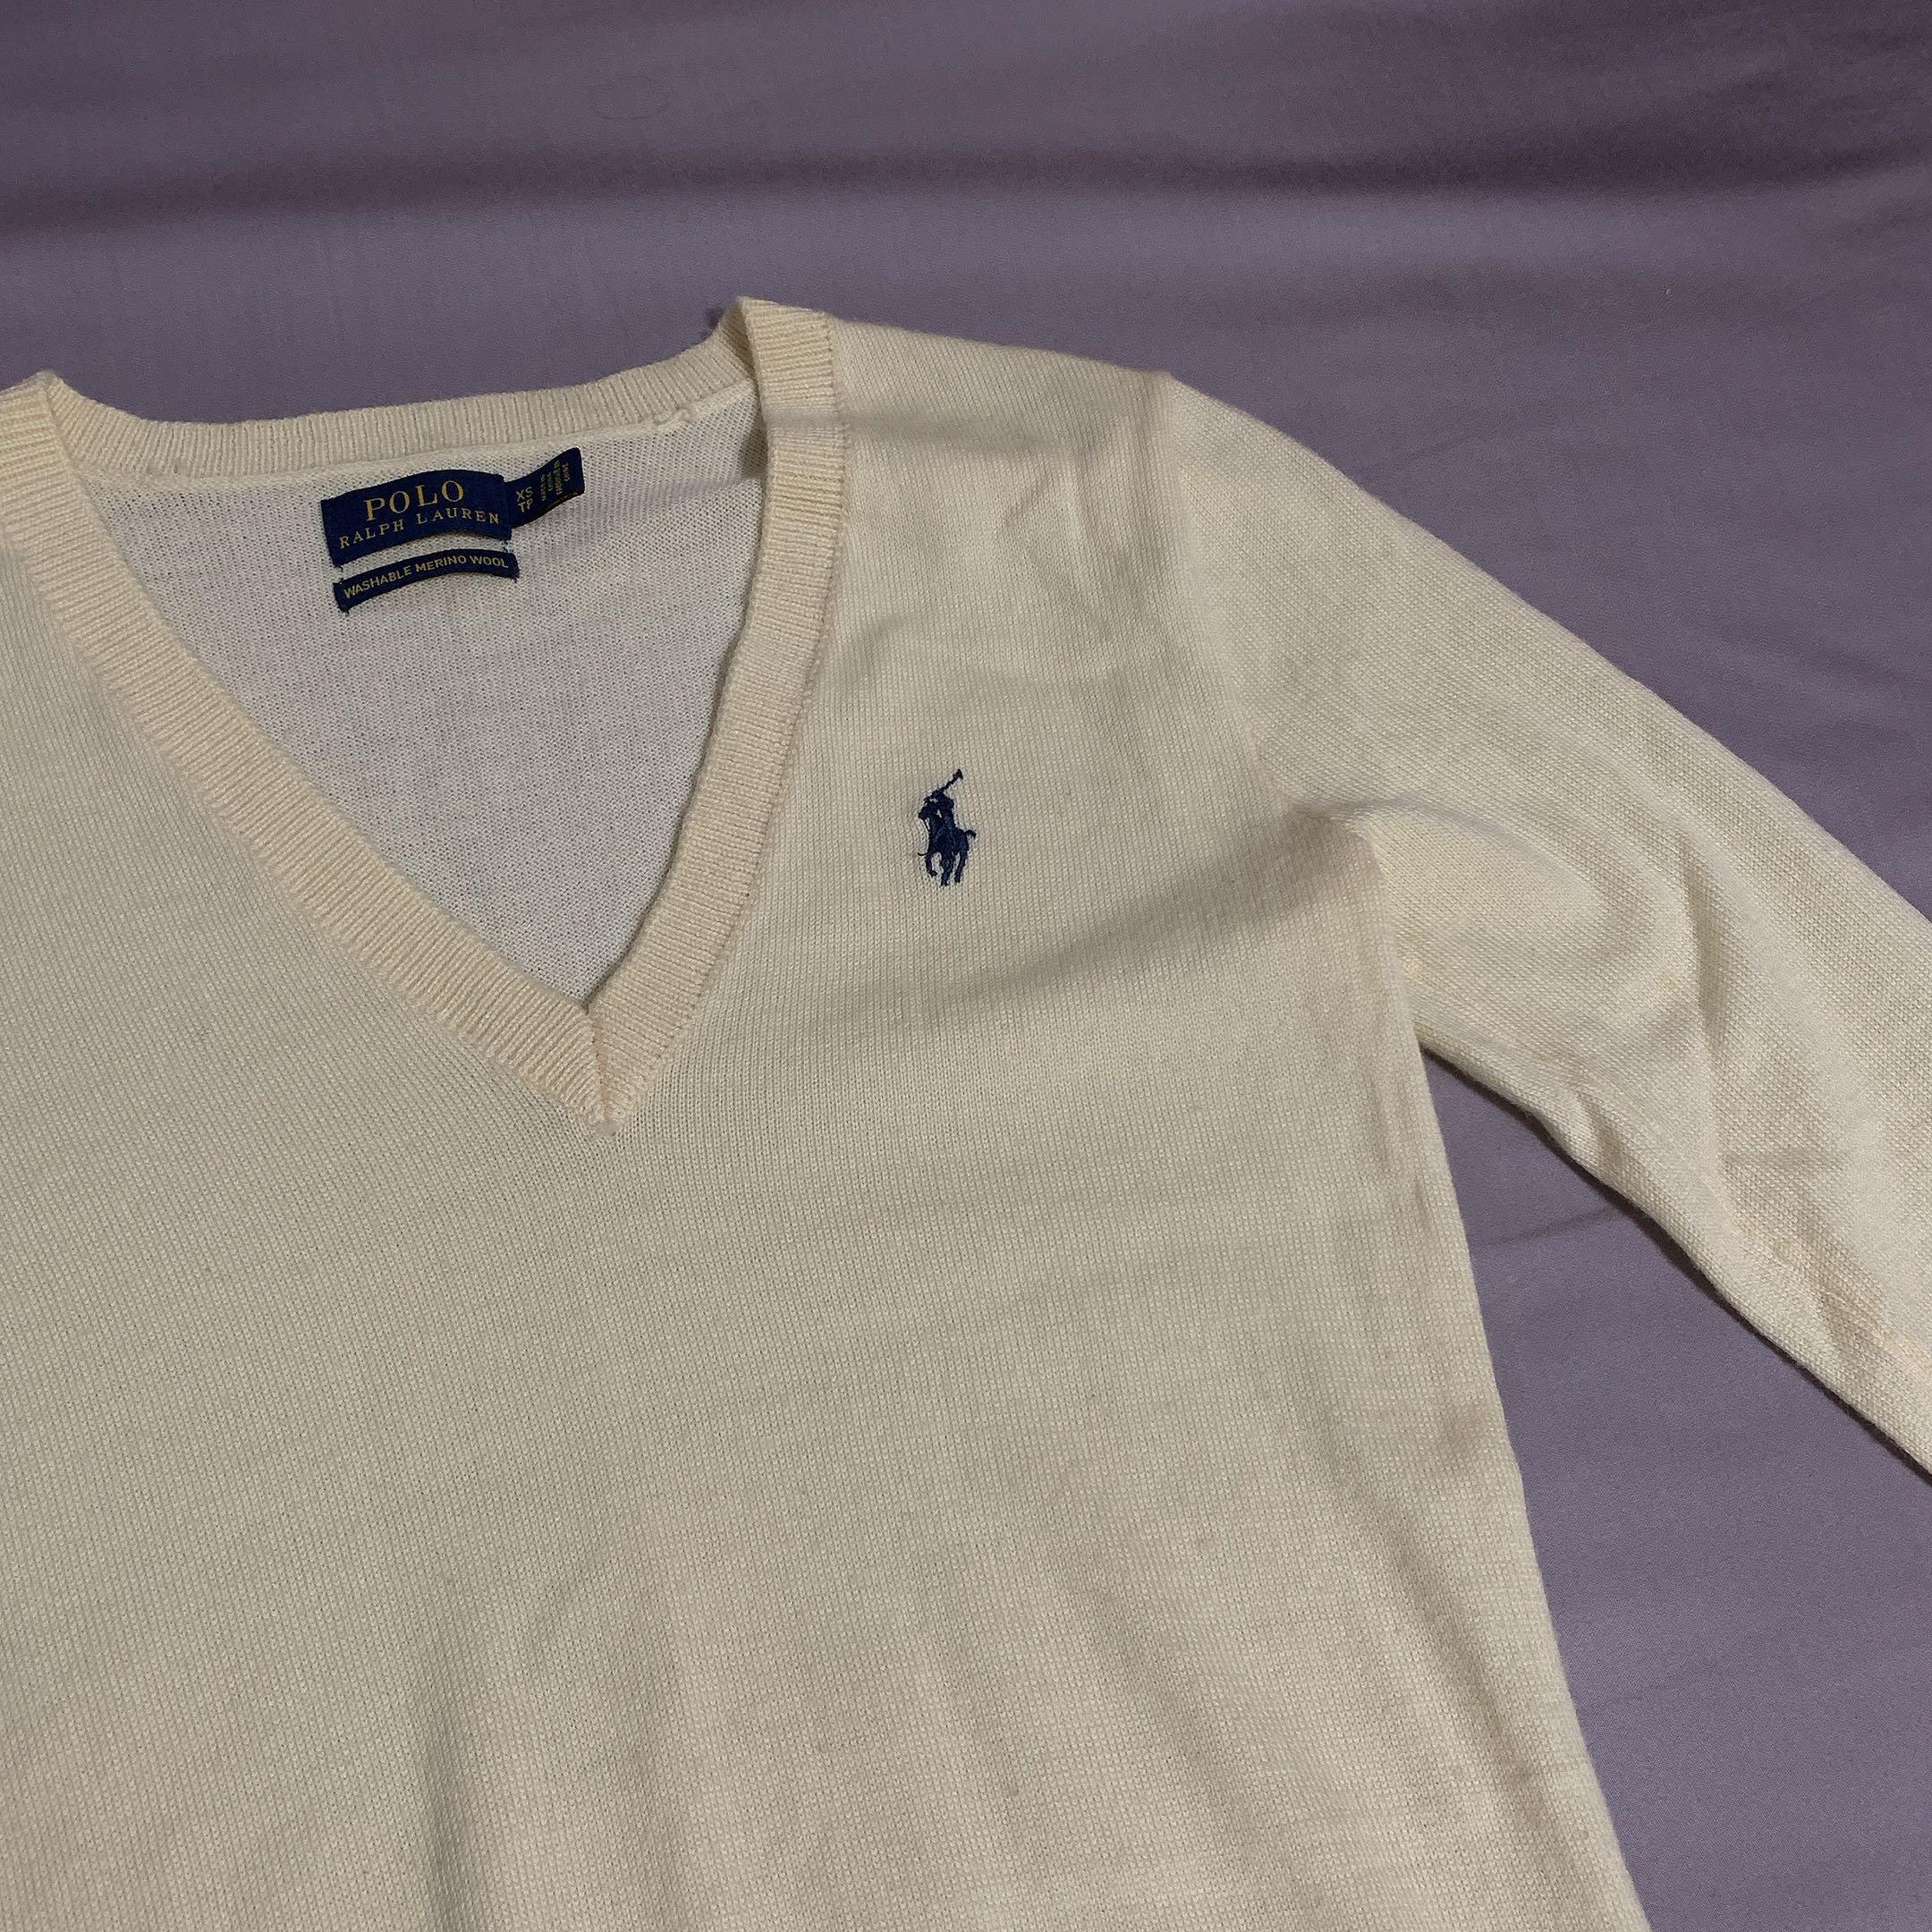 Authentic Polo Ralph Lauren V-neck washable merino wool sweater jumper knit  long sleeve top, Men's Fashion, Tops & Sets, Tshirts & Polo Shirts on  Carousell